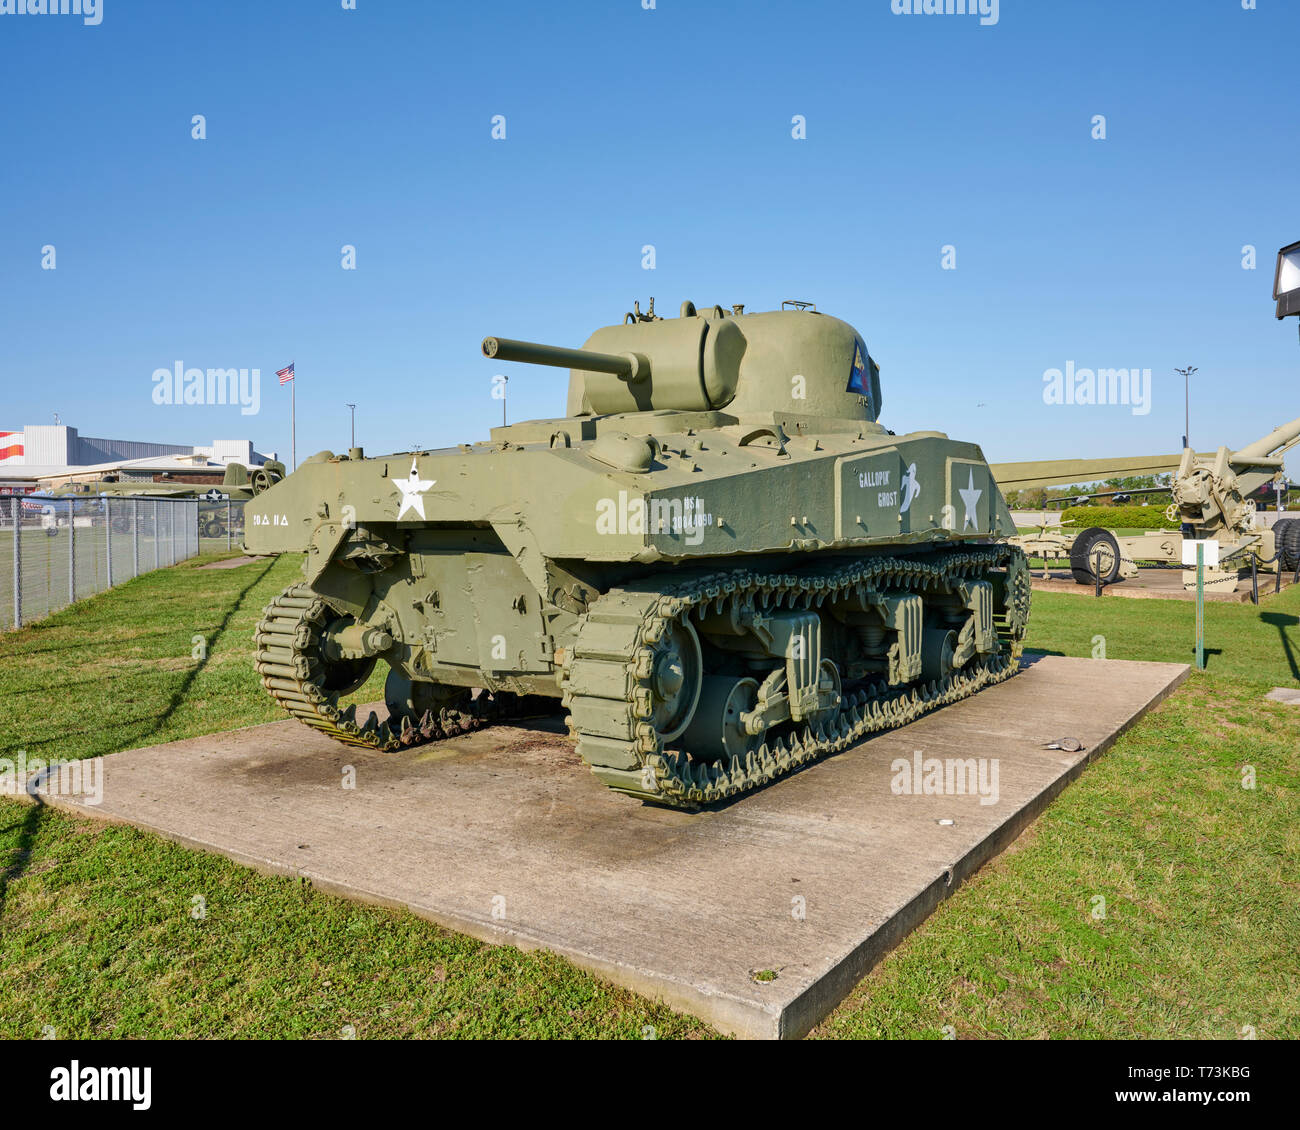 United States US Army M4 Sherman tank from WWII or WW2 on display at an outdoor military history museum in Mobile Alabama, USA. Stock Photo